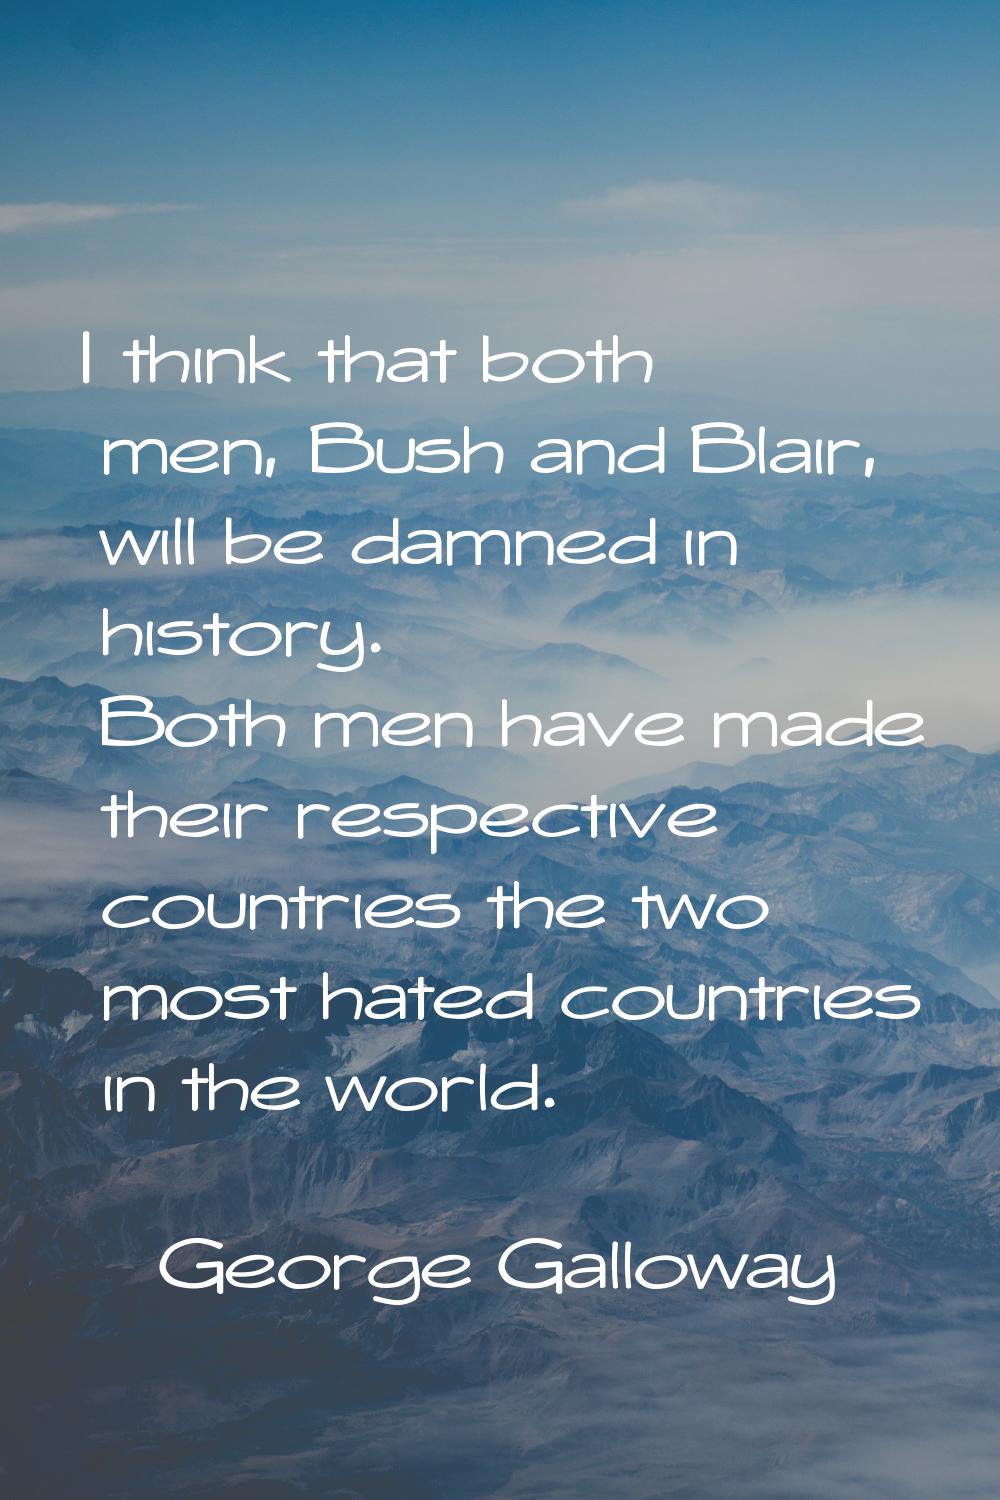 I think that both men, Bush and Blair, will be damned in history. Both men have made their respecti